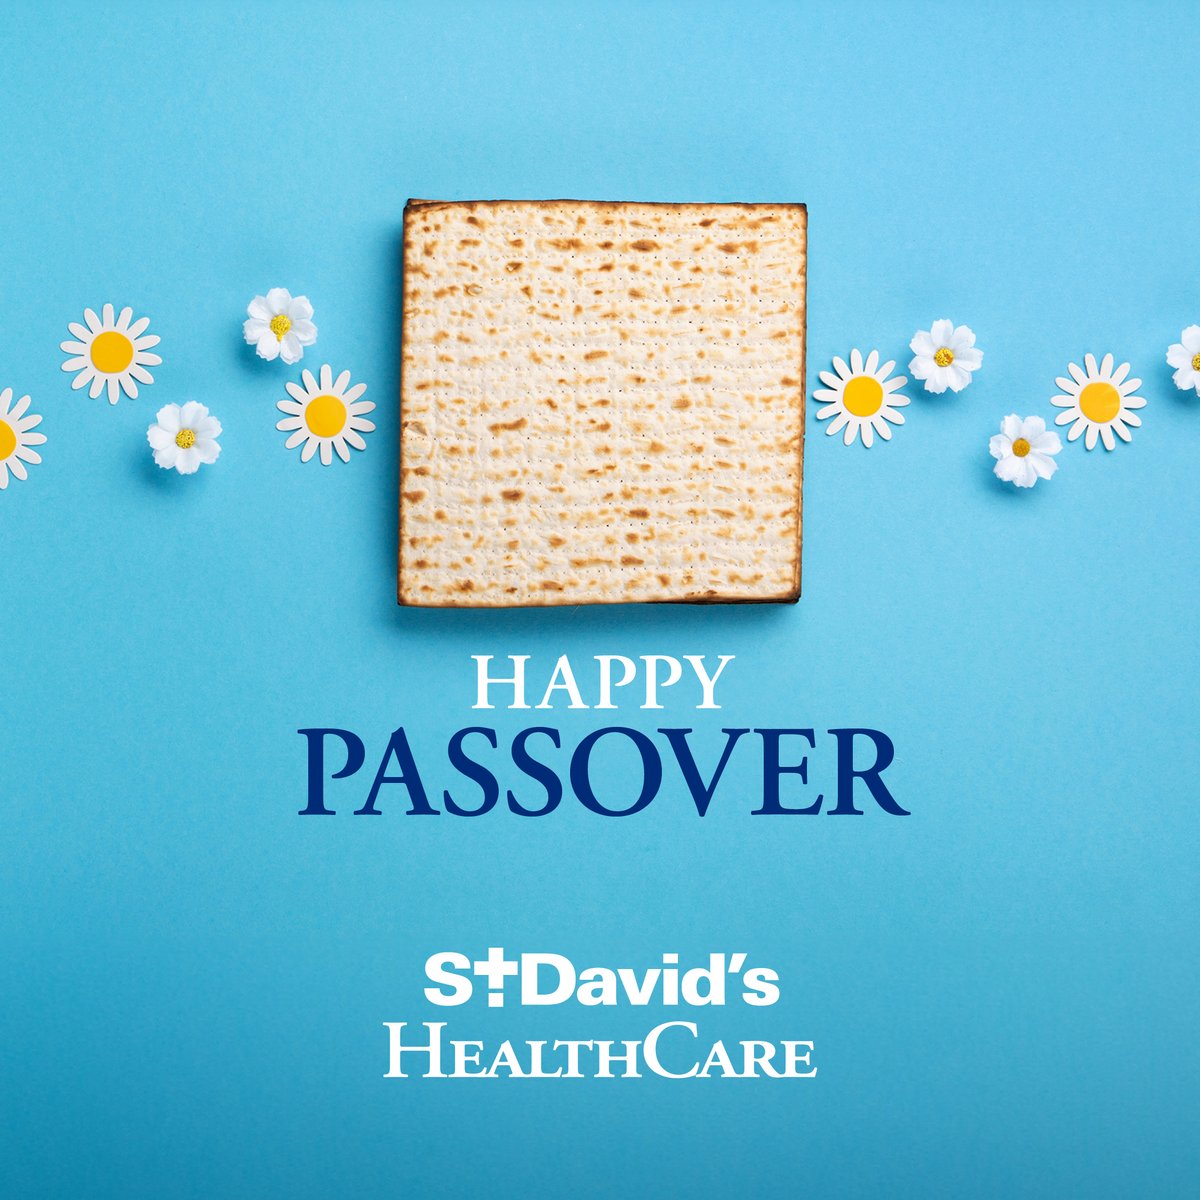 Wishing everyone a happy, healthy, and meaningful Passover!